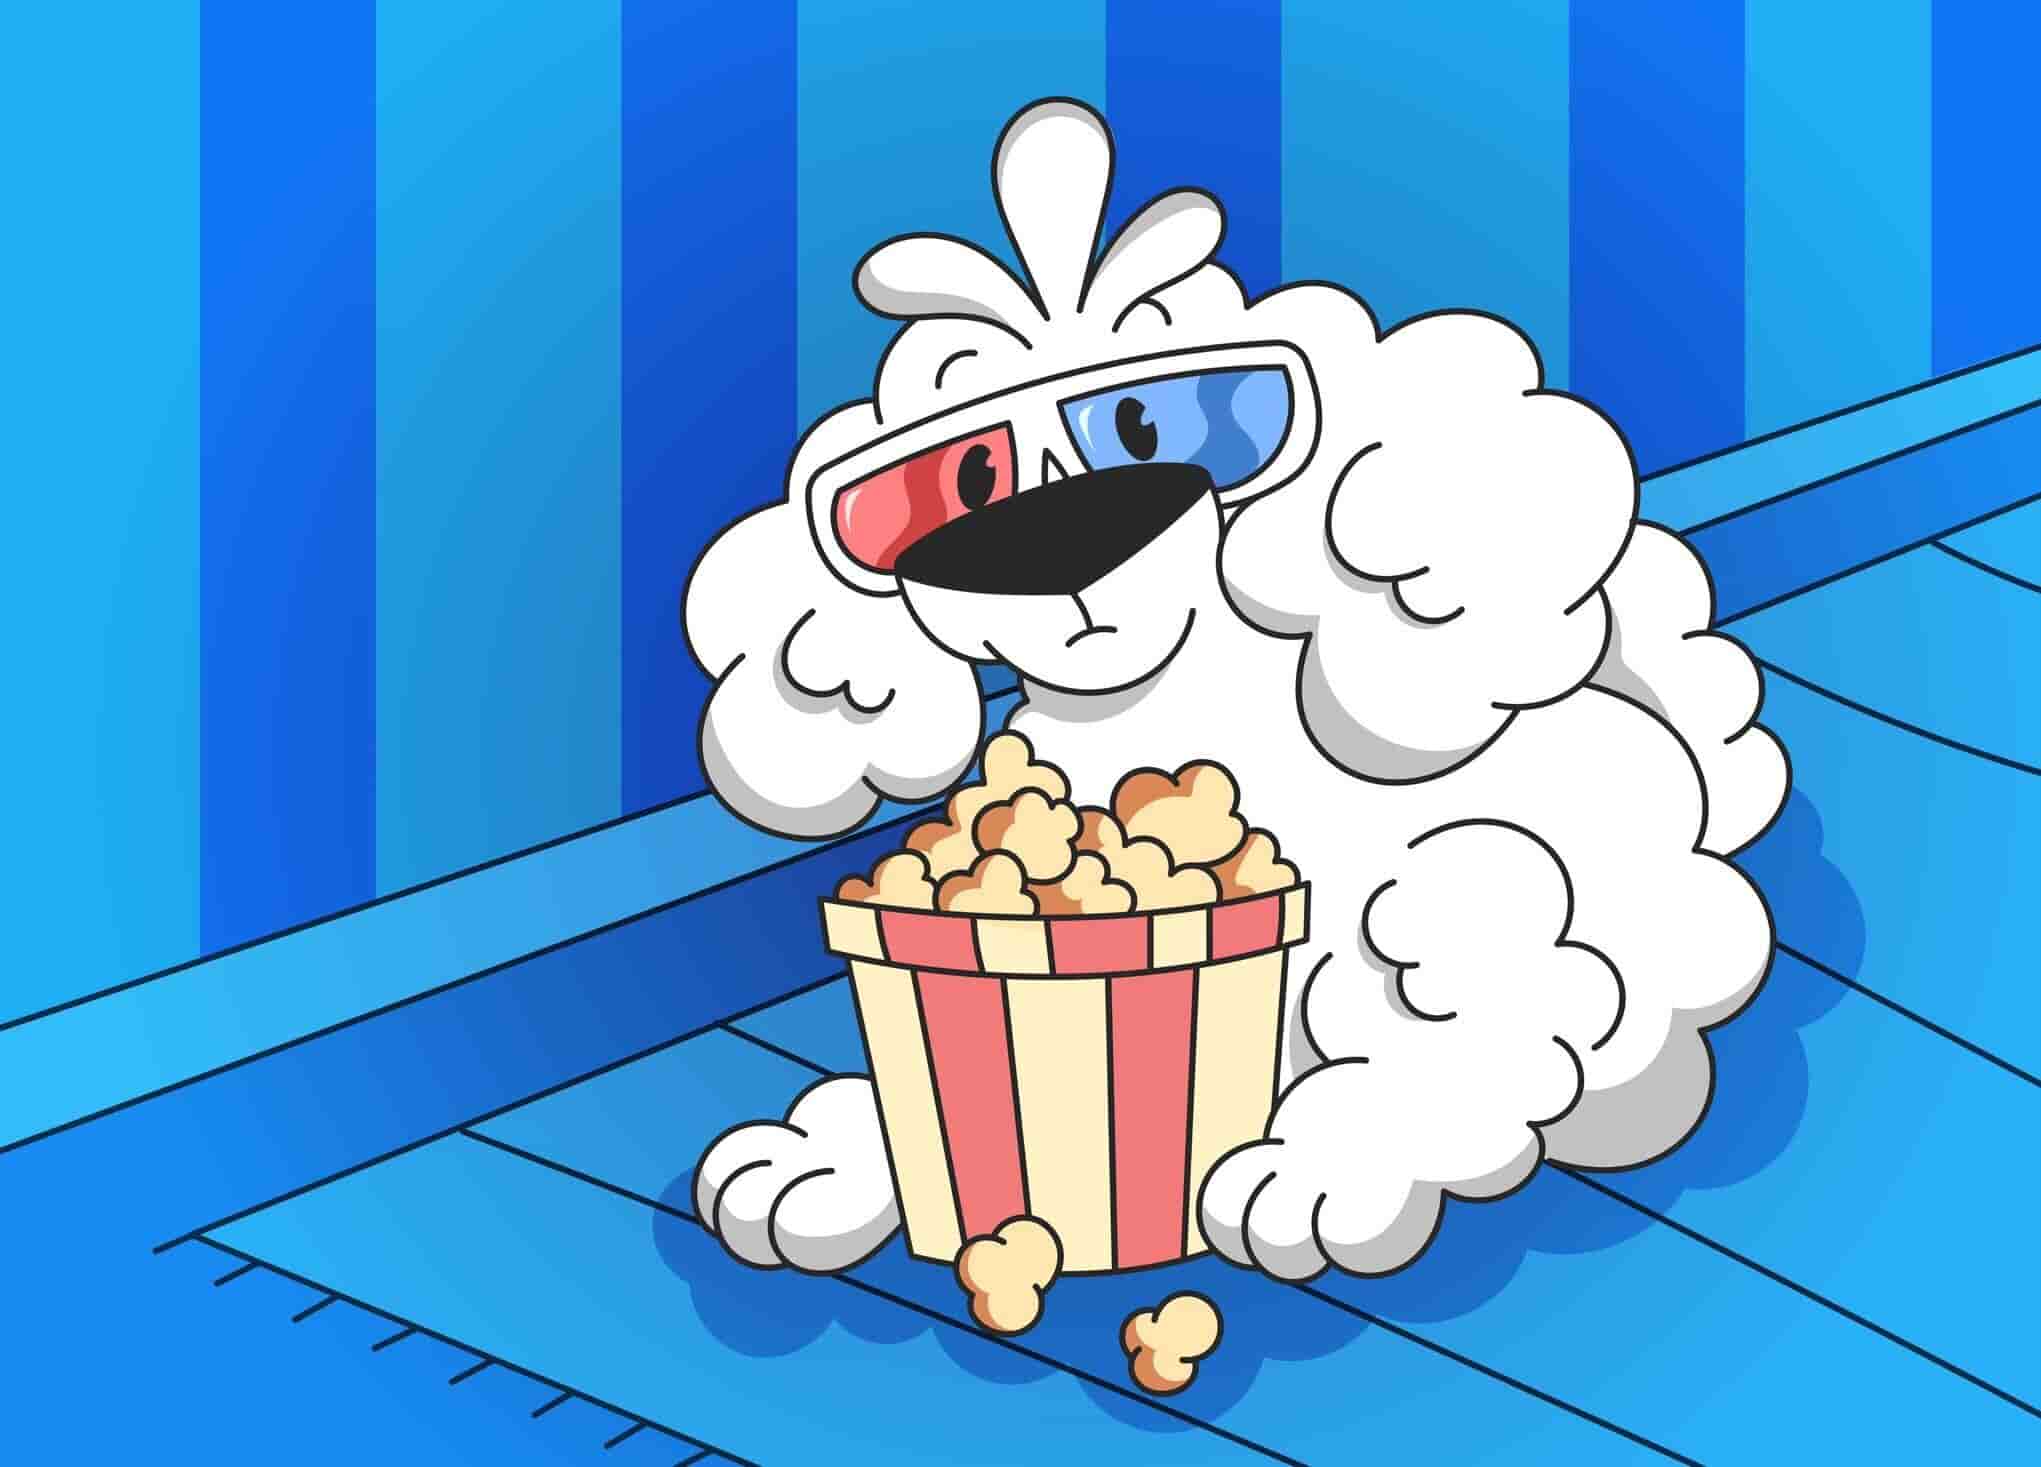 Can Dogs Have Popcorn?